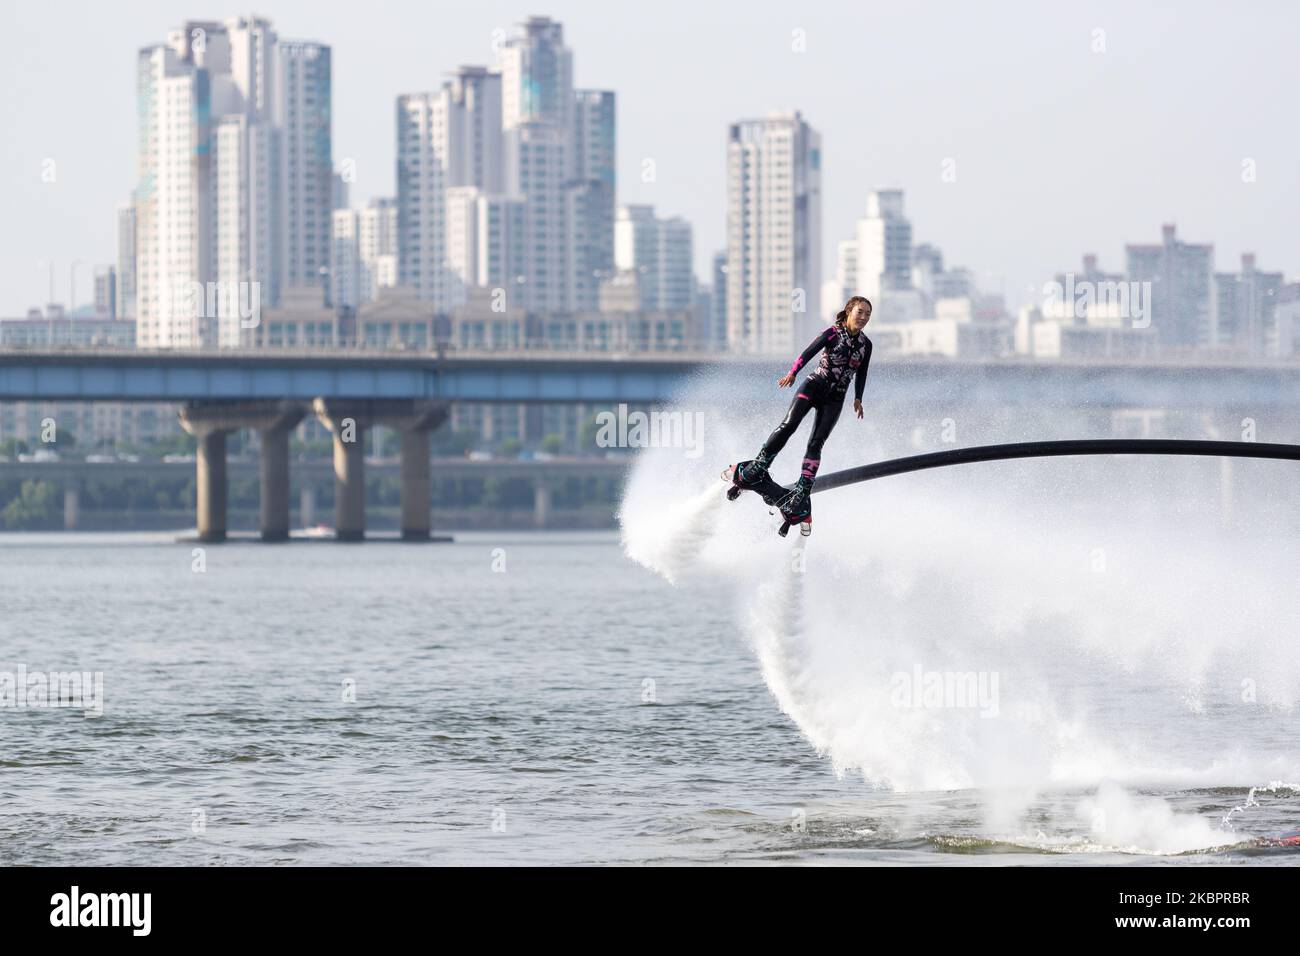 Flyboarding World Champion Park Jin-min gives a demonstration on Yeouido Hangang River Park on June 05, 2020 in Seoul, South Korea. since 2011 flyboarding is a new extreme watersport allowing the pilot to fly high above the water. This is made possible by a water propulsion system that is attached with a tube to the feet and connected to a water scooter with a high pressure water pump on a board. (Photo by Chris Jung/NurPhoto) Stock Photo